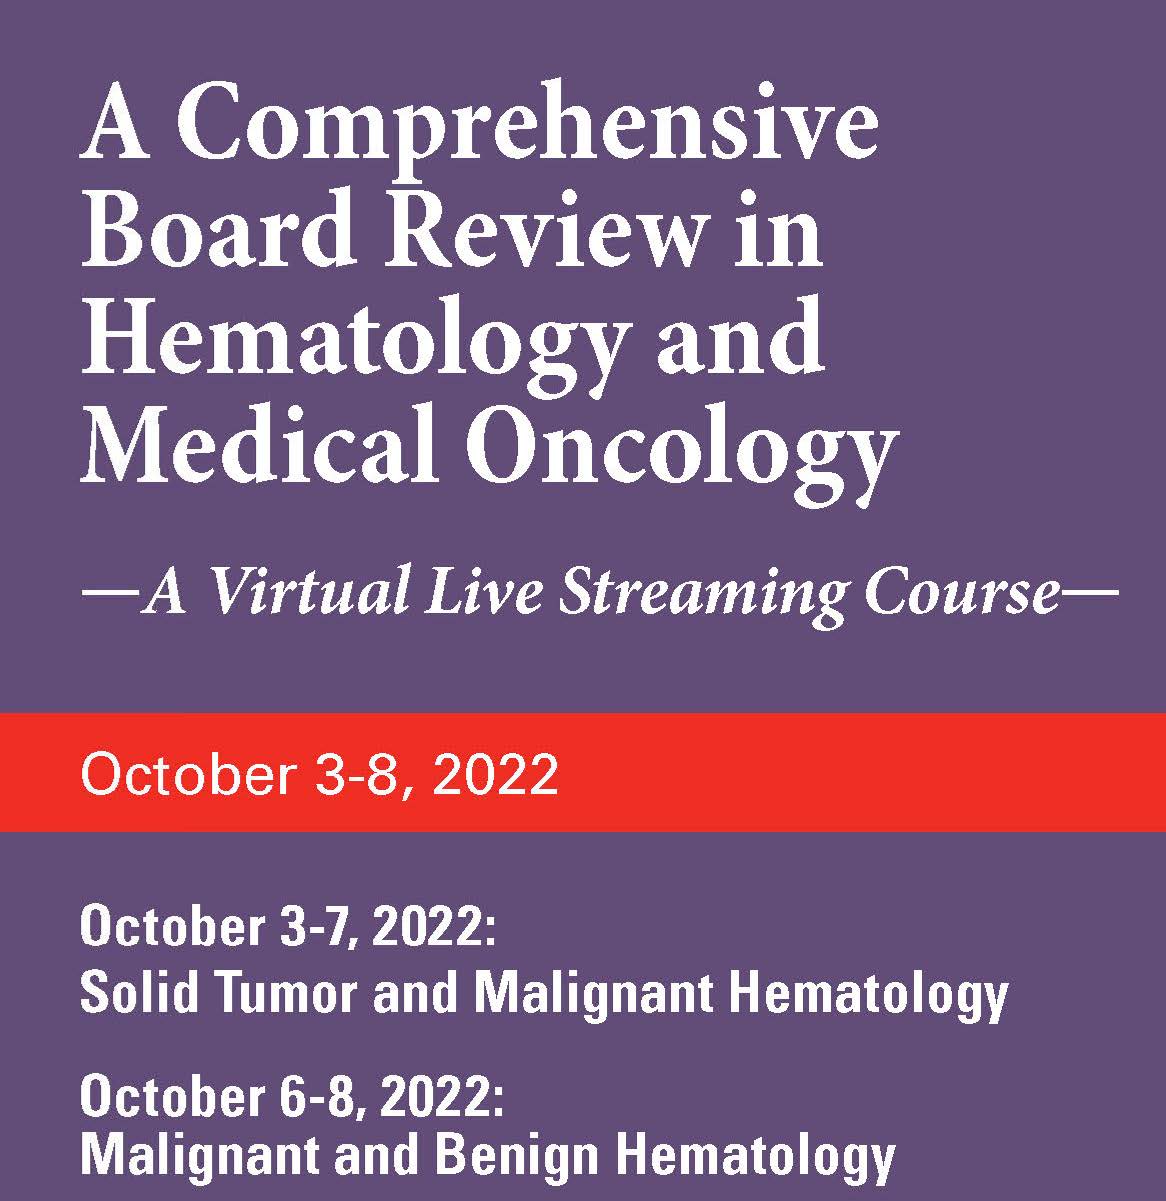 The 2022 MD Anderson Cancer Center/Baylor College of Medicine Hematology and Medical Oncology Board Review Materials Only - NOT CONFERENCE REGISTRATION Banner